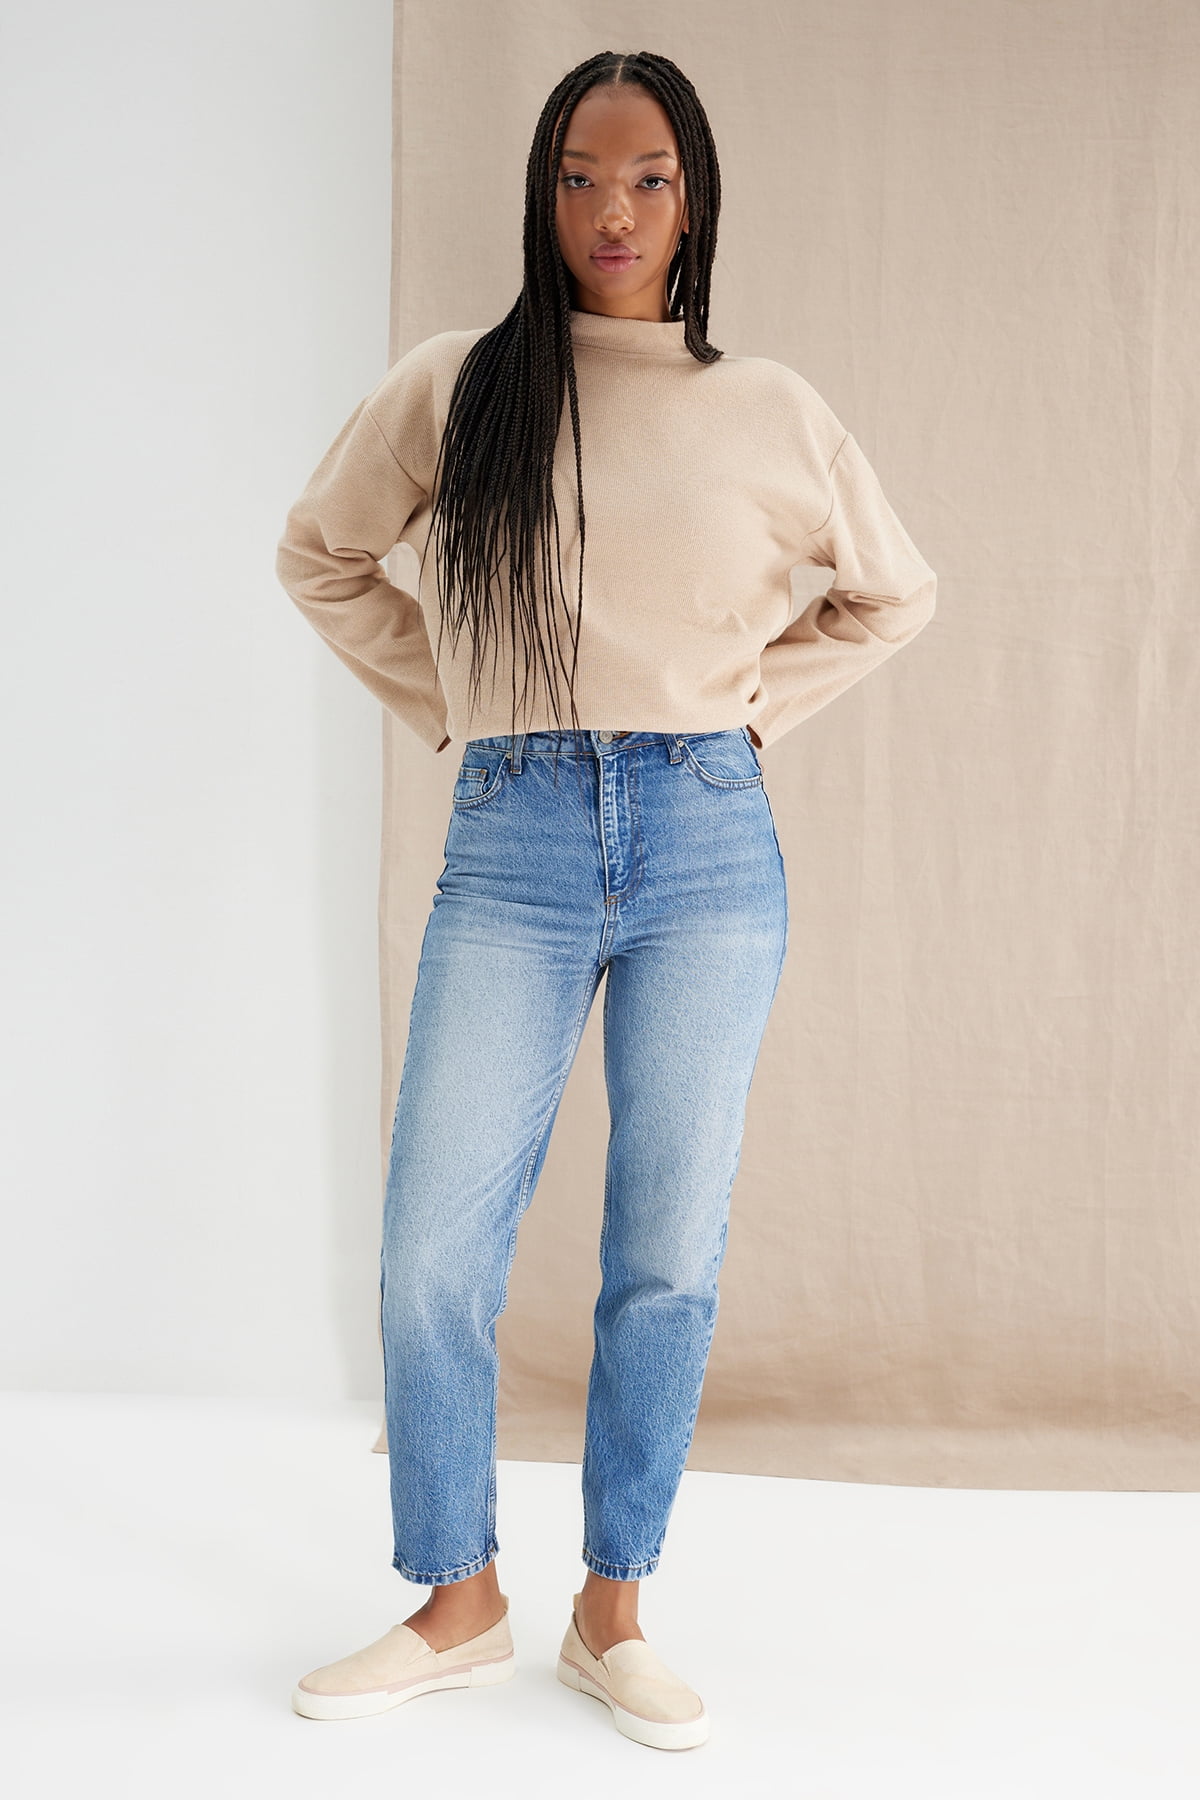 How to Wear Mom's Jeans and Outfit Styles | Off The Cuff